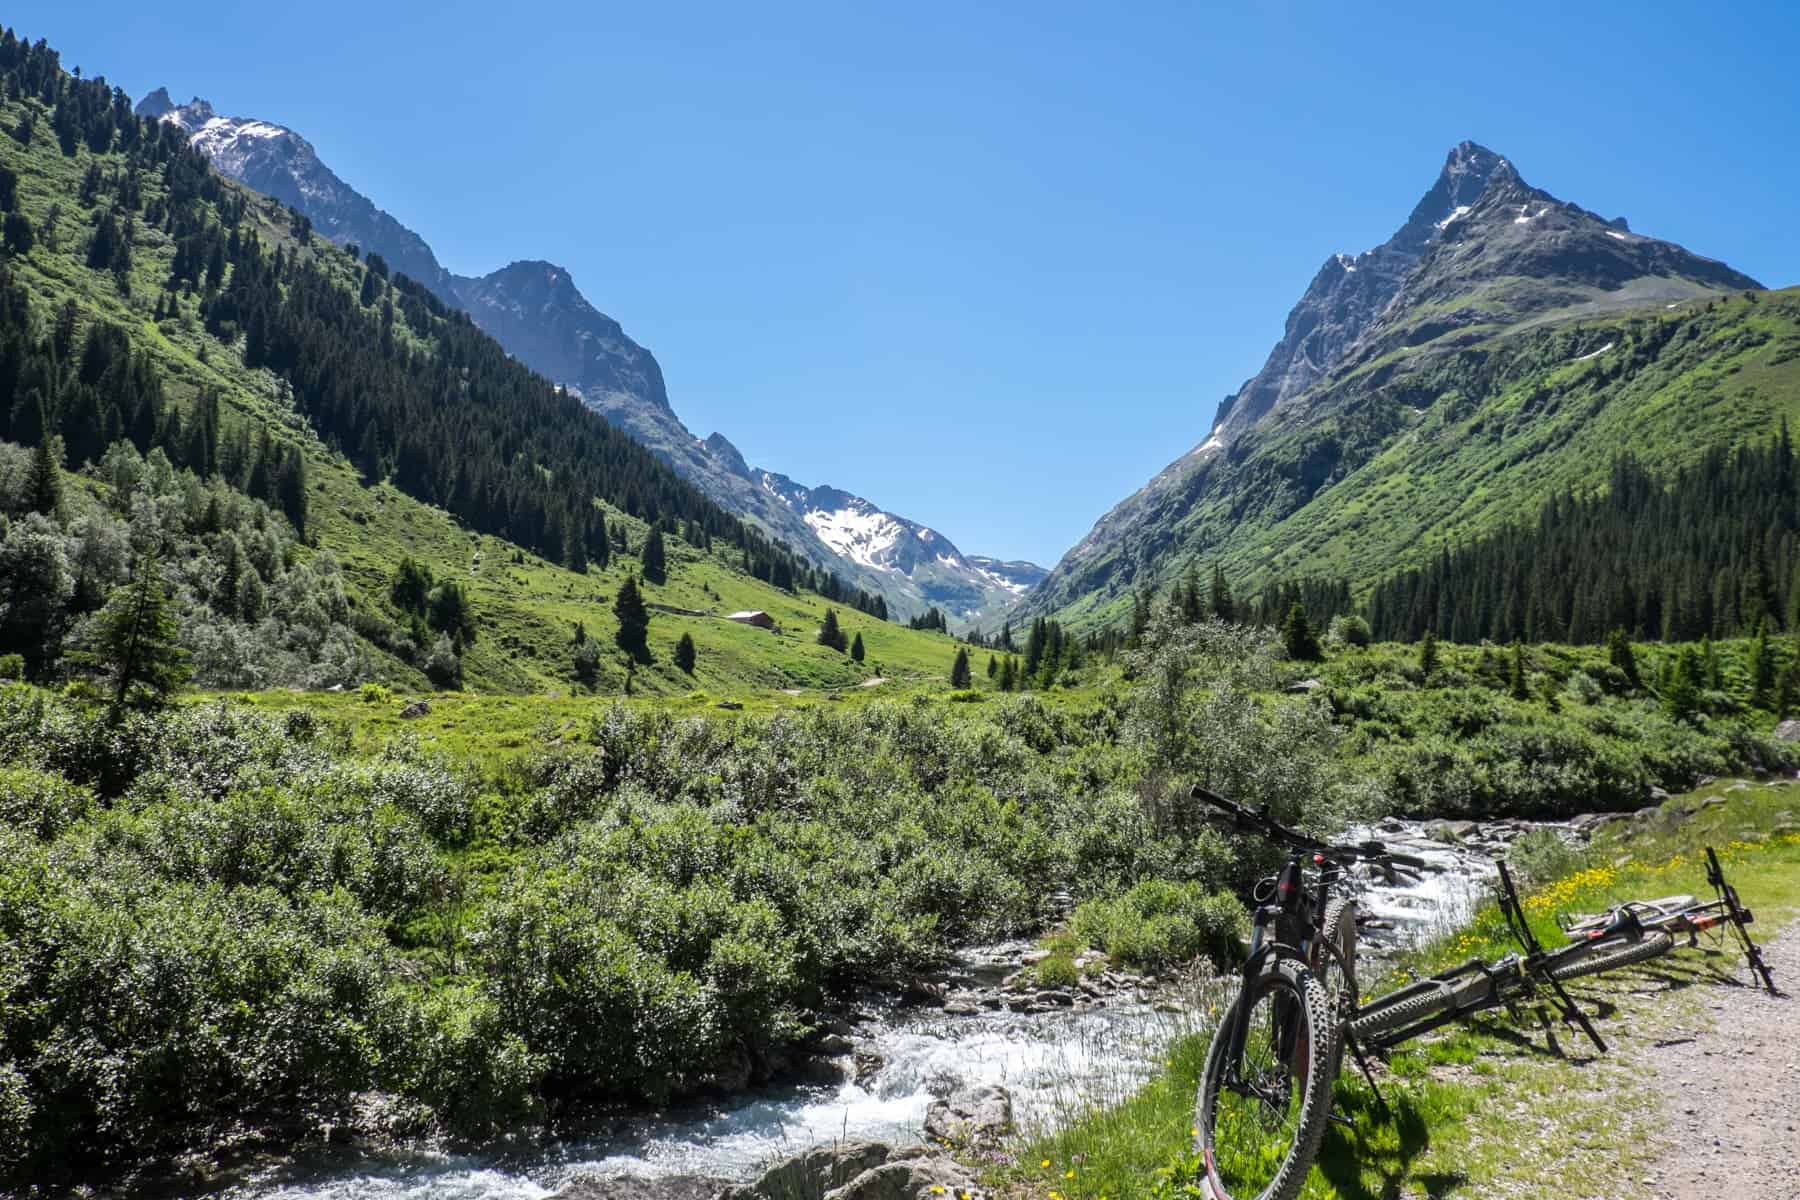 In St. Anton in Austria, two bikes rest next to a winding river that flows into a green valley, backed by mountains